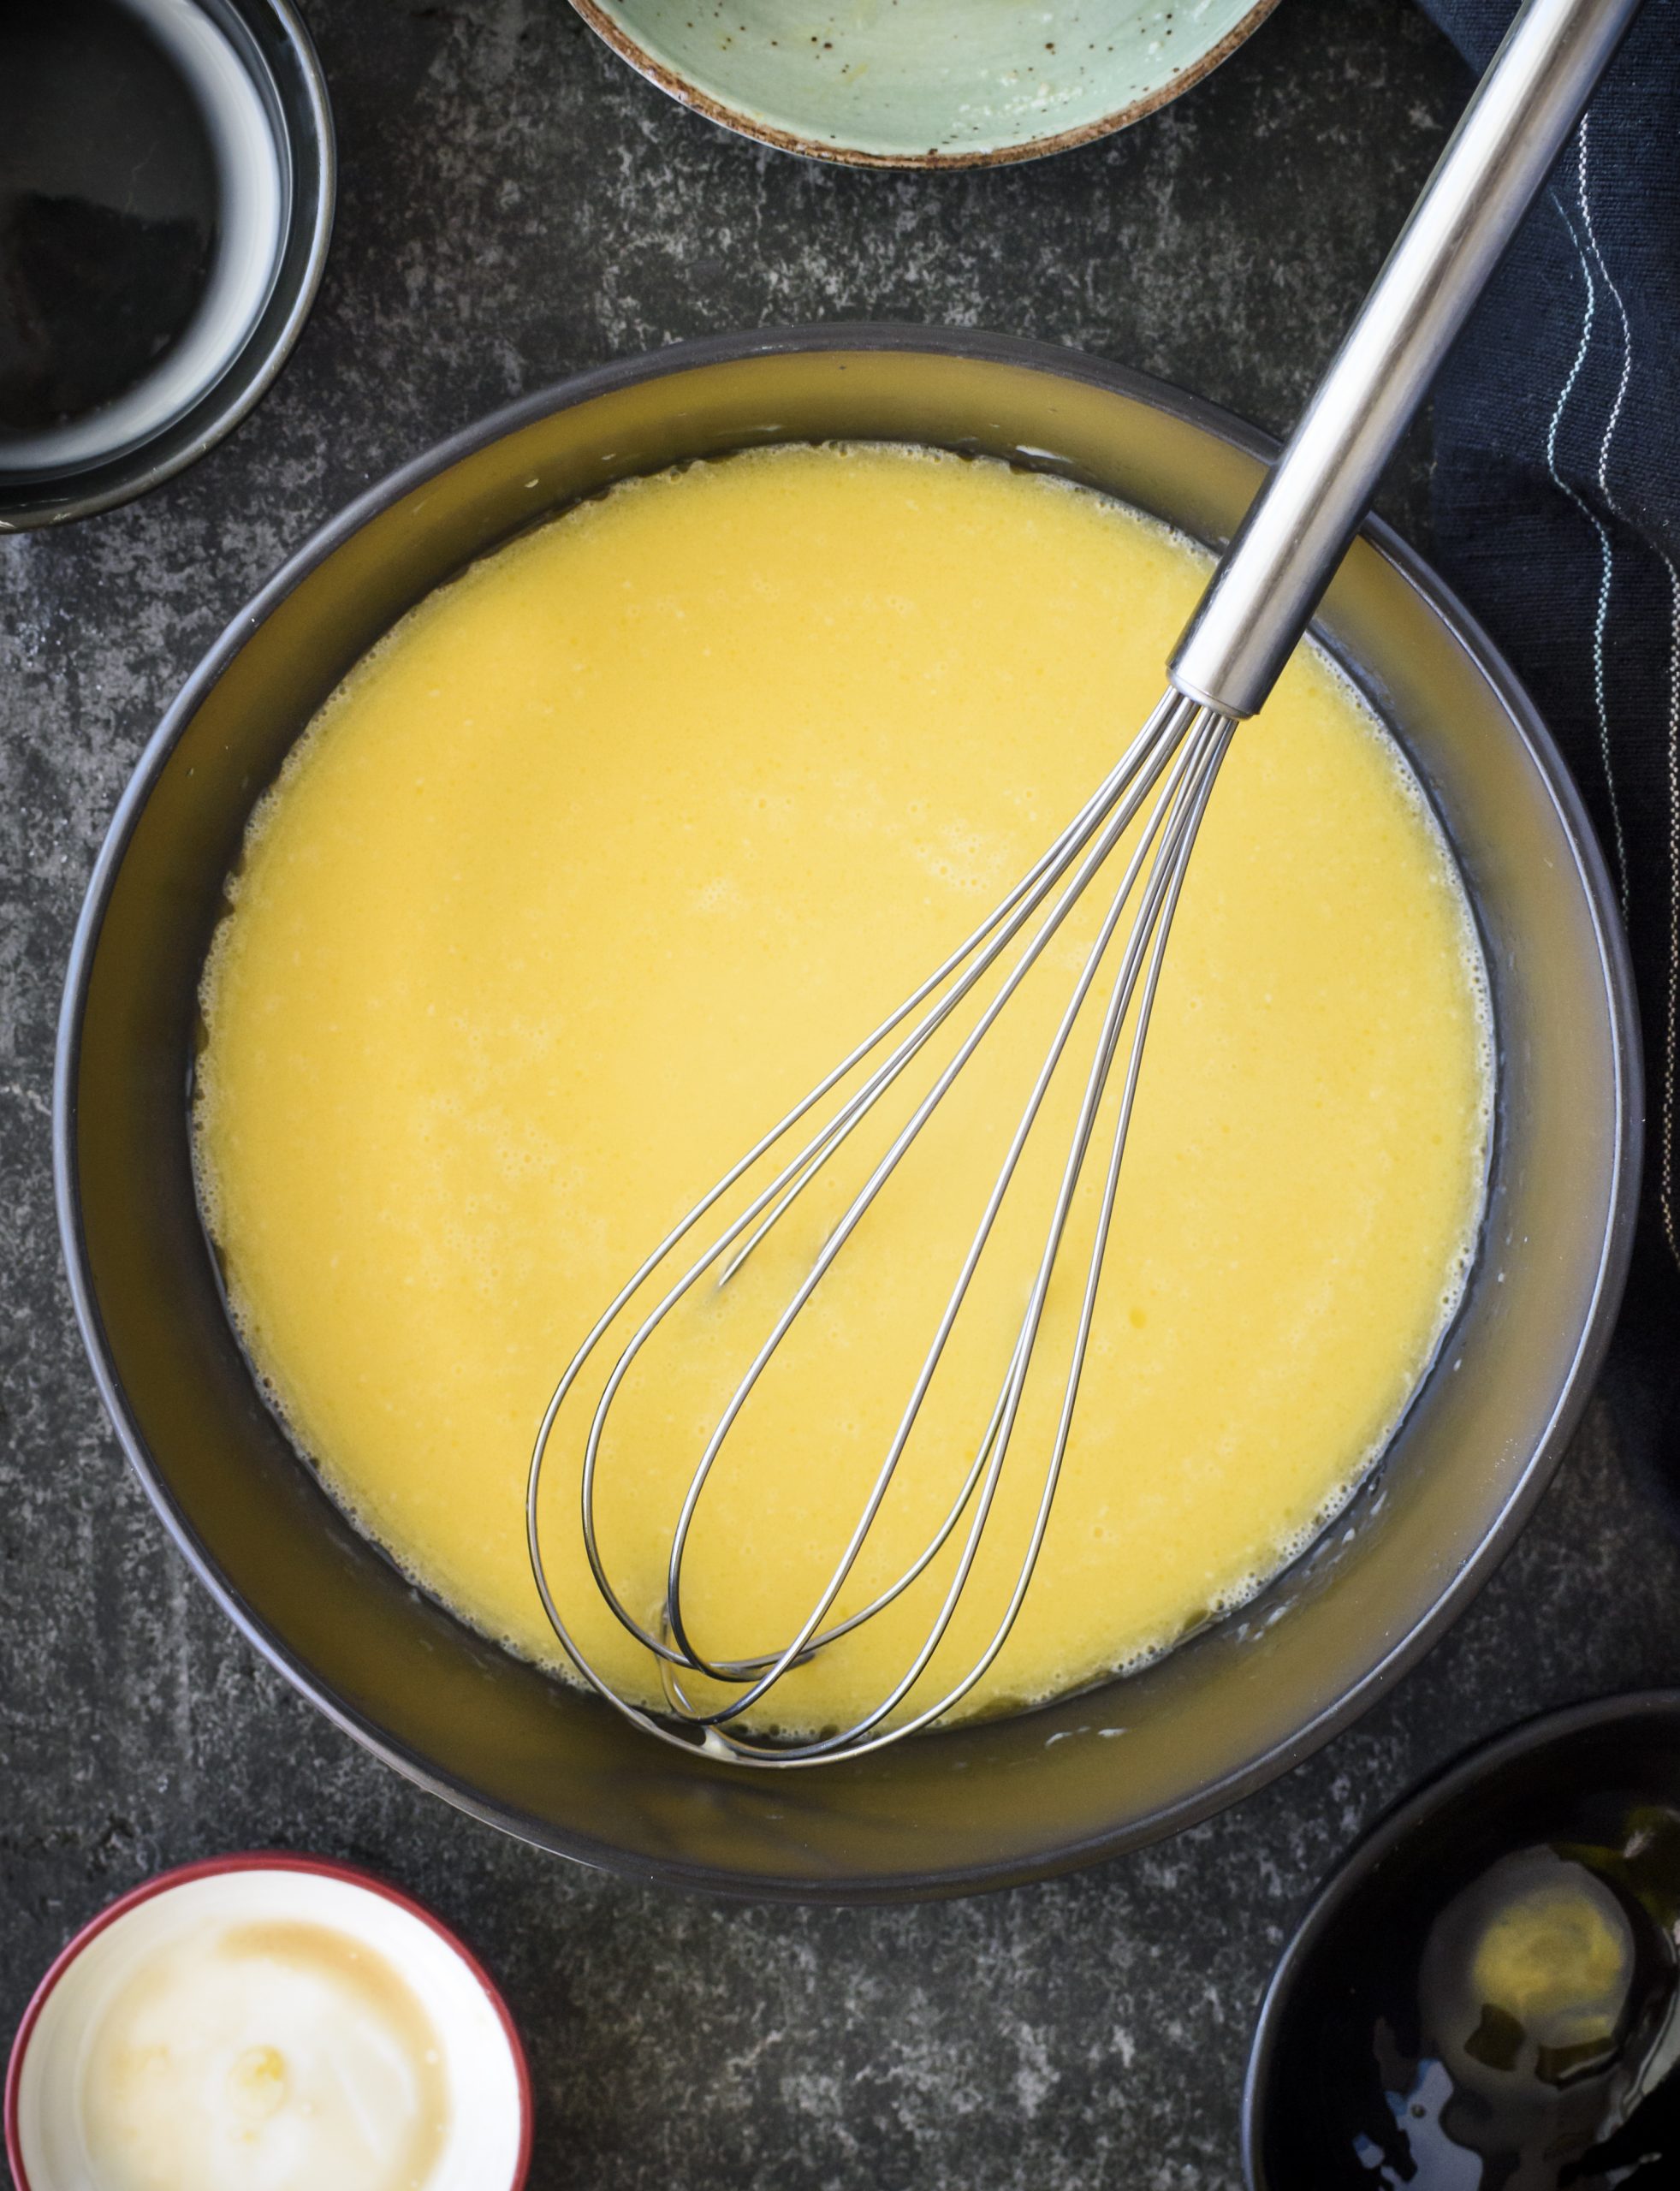 Blend together the butter, milk, egg yolk, and vanilla in another mixing bowl. 